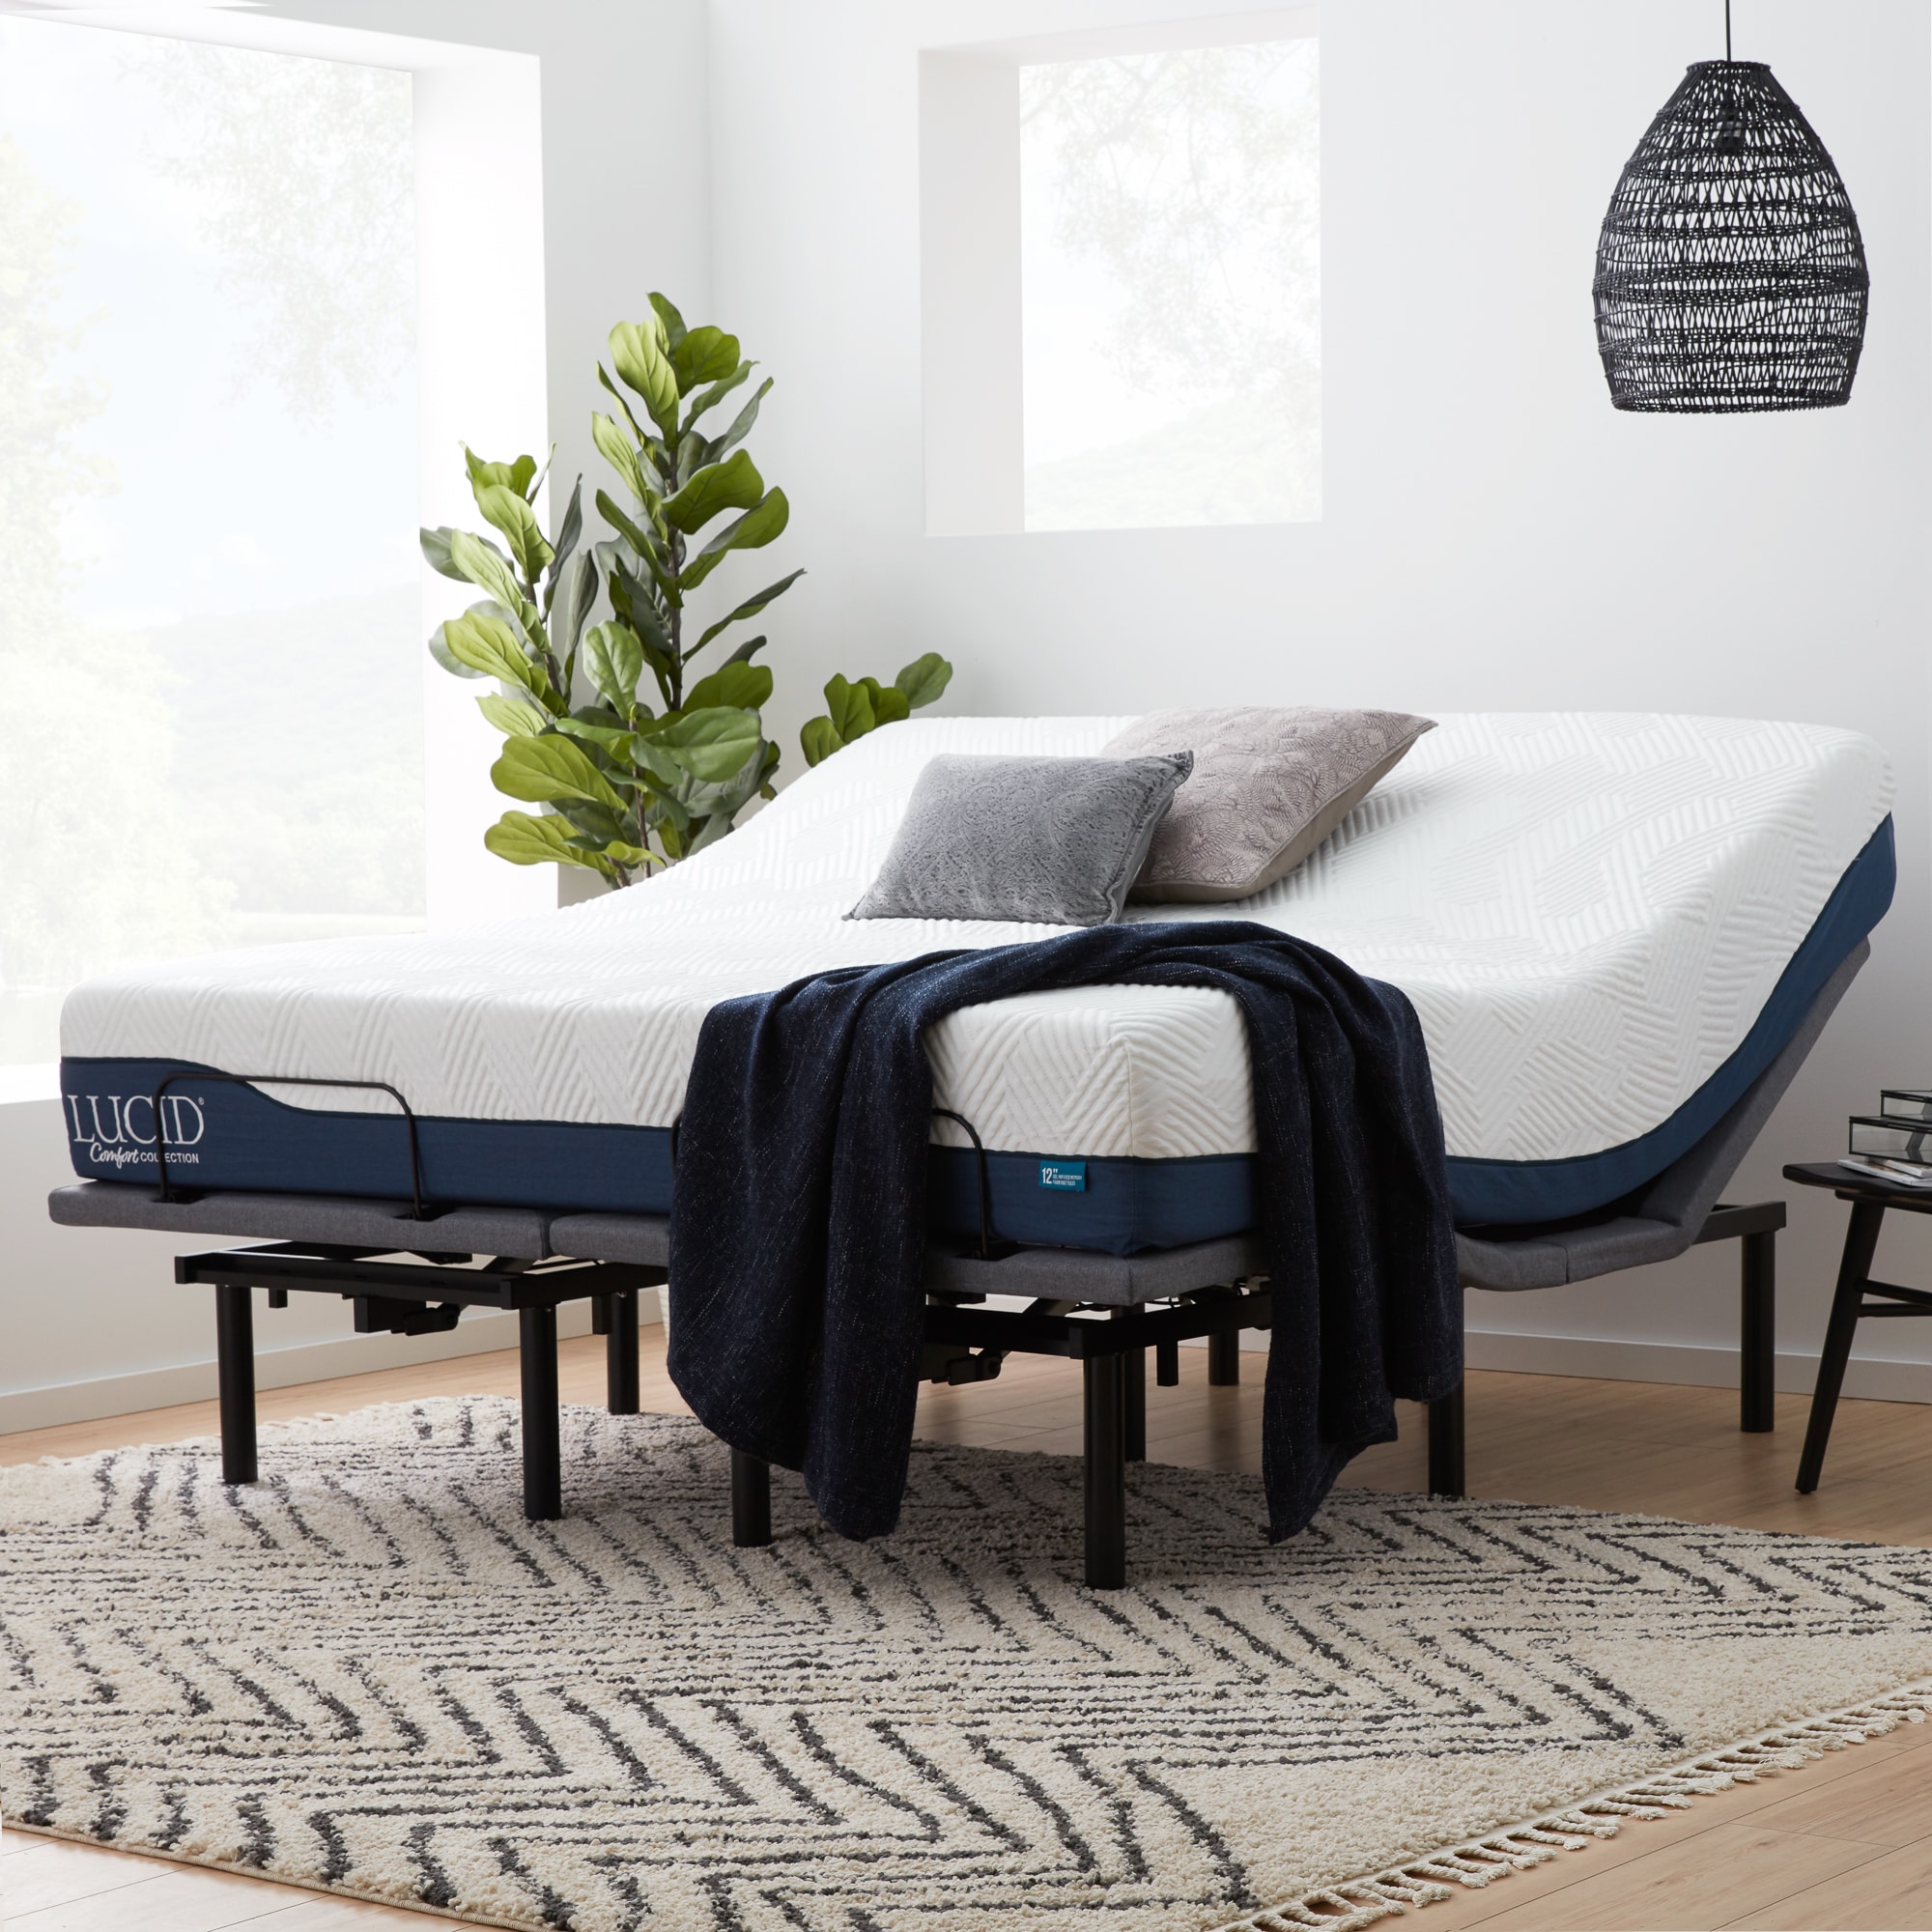 LUCID Comfort Collection Deluxe Adjustable Bed Base - On Sale